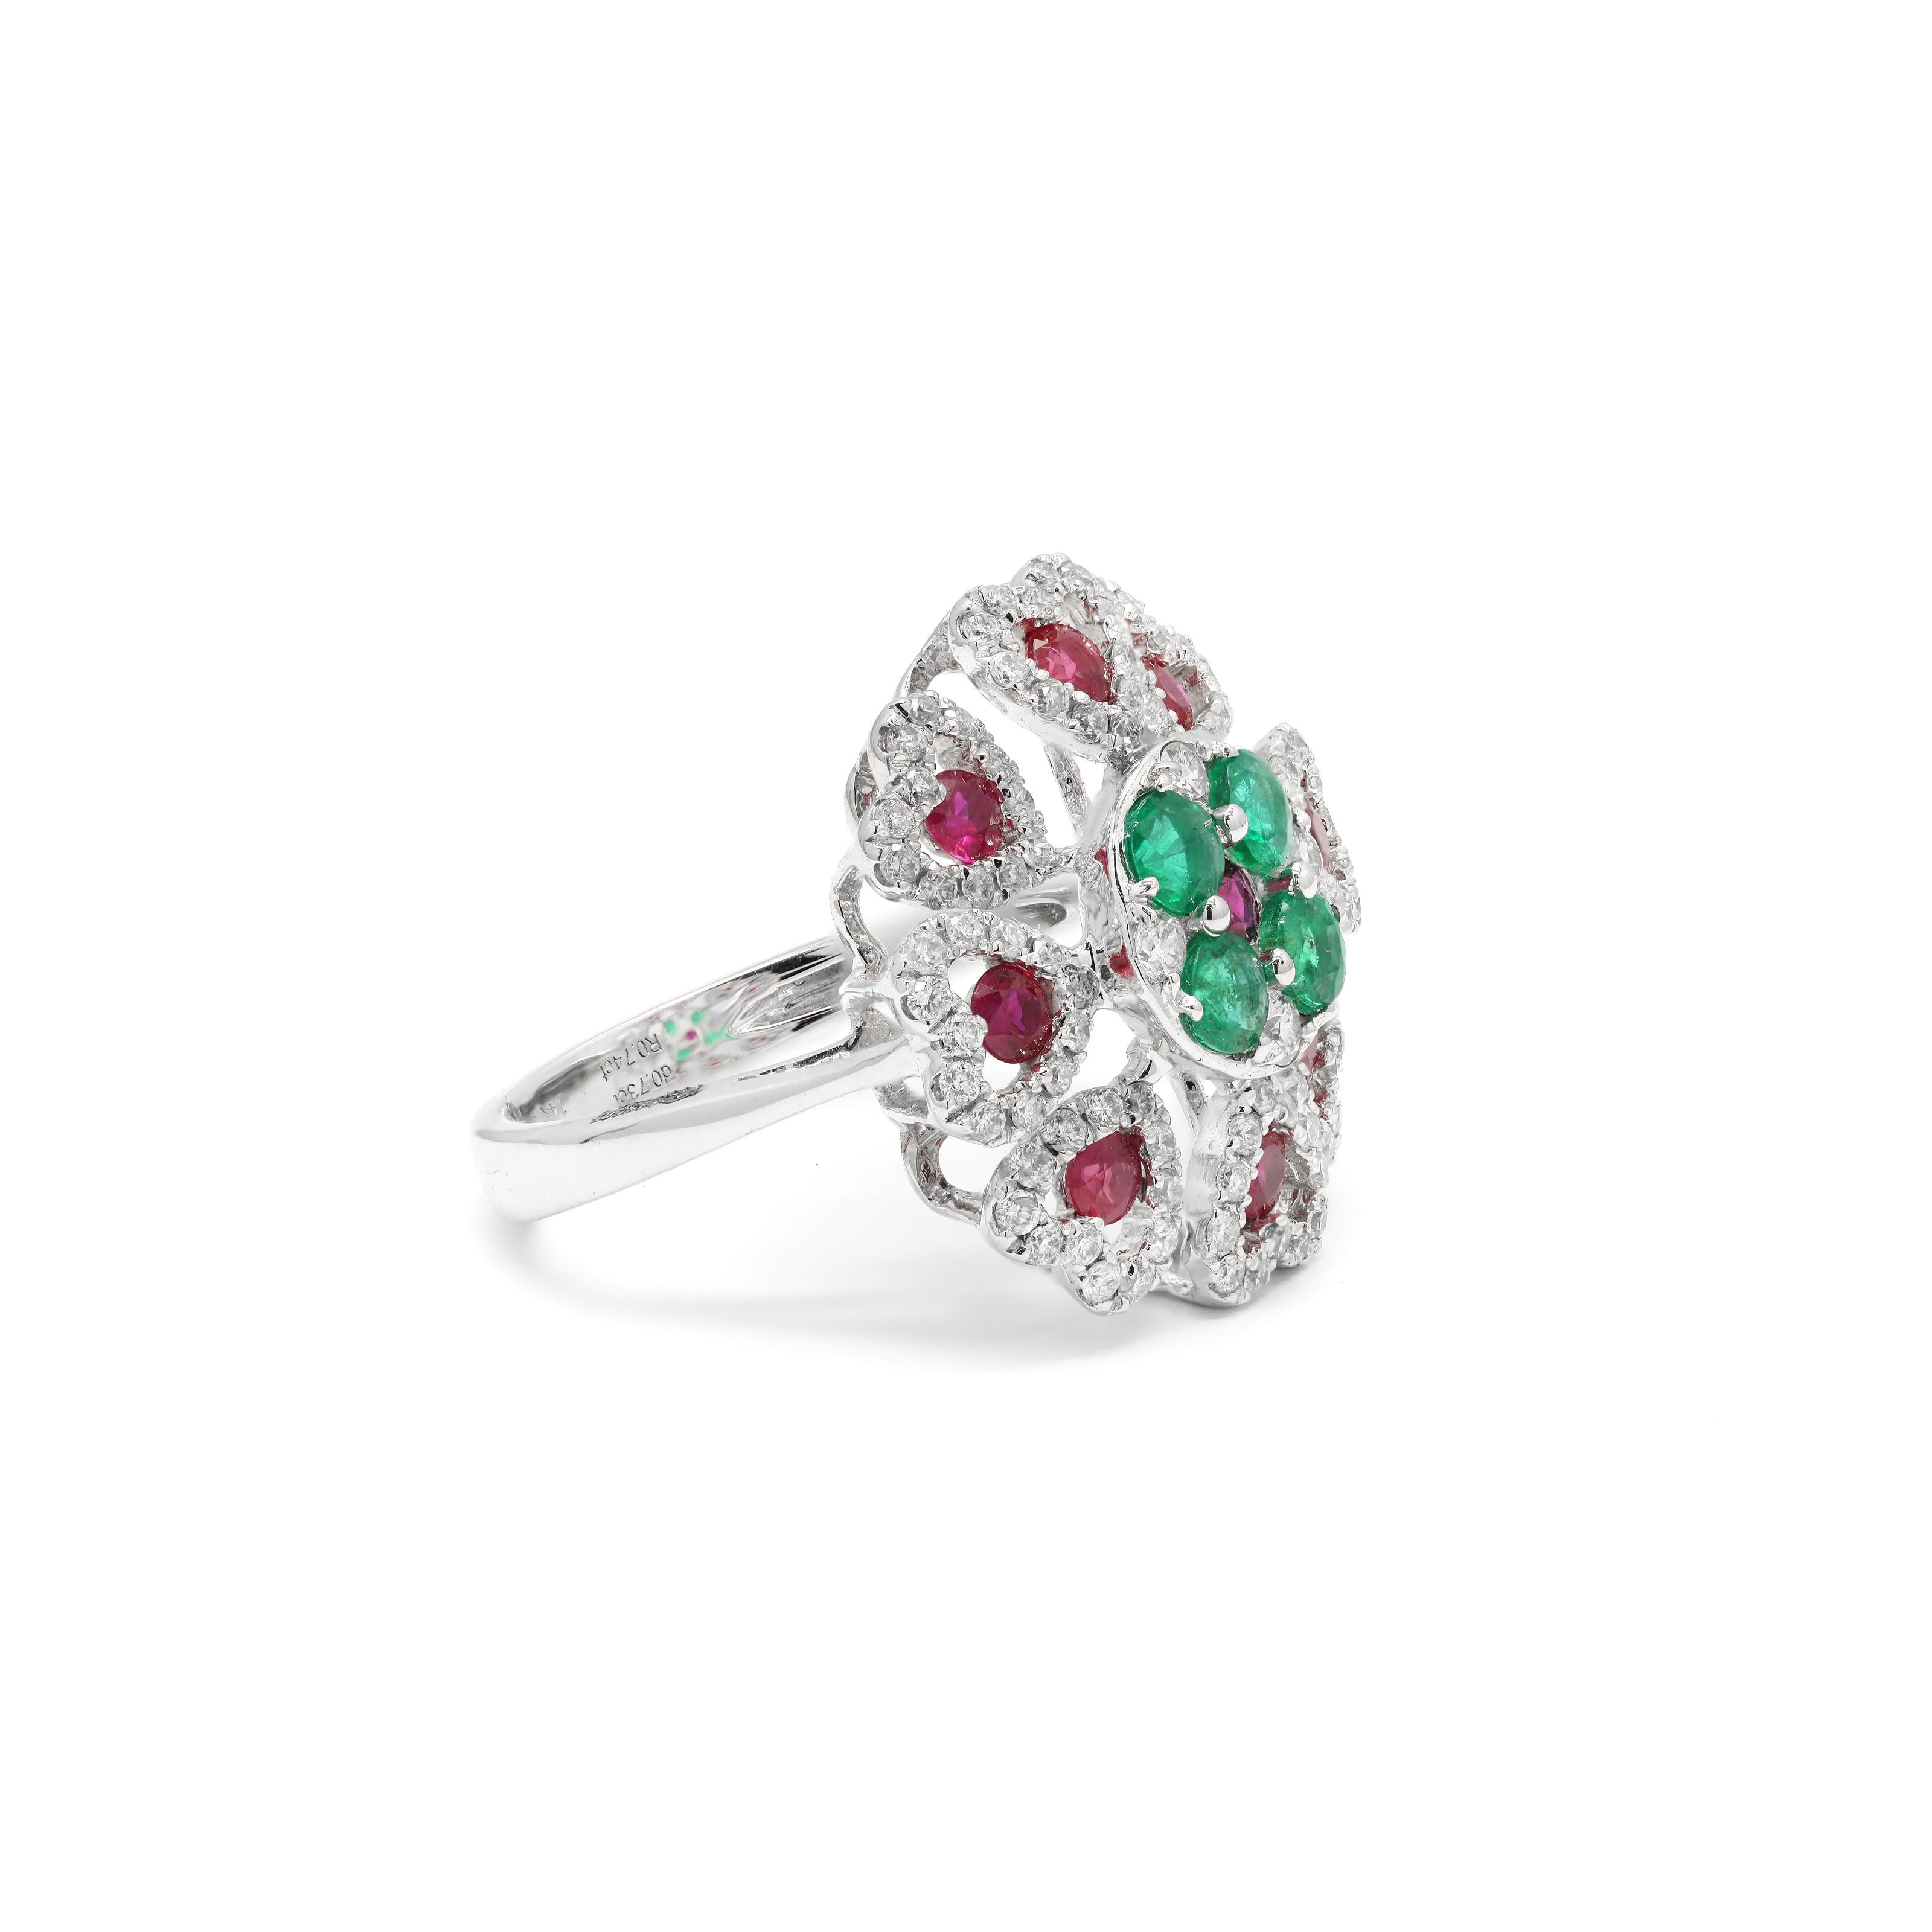 For Sale:  14K White Gold Emerald and Ruby Floral Cocktail Ring with Diamonds 2